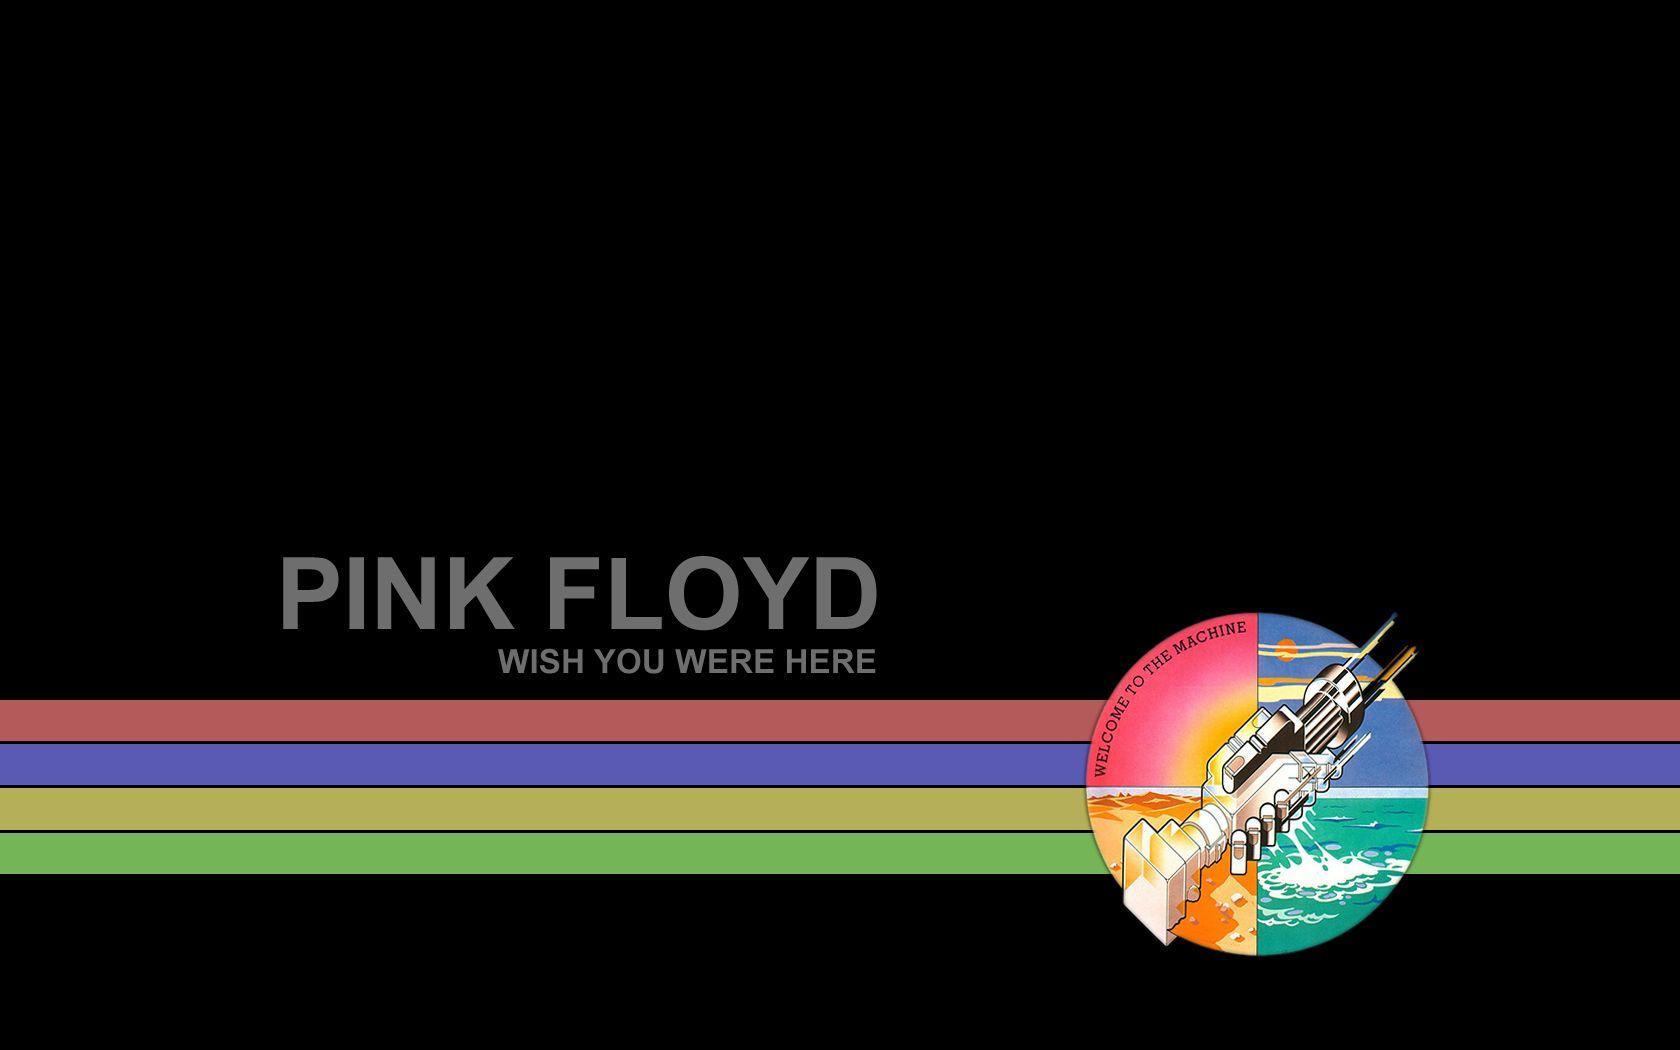 Best Pink Floyd Albums, Wish You Were Here, Animals and The Wall